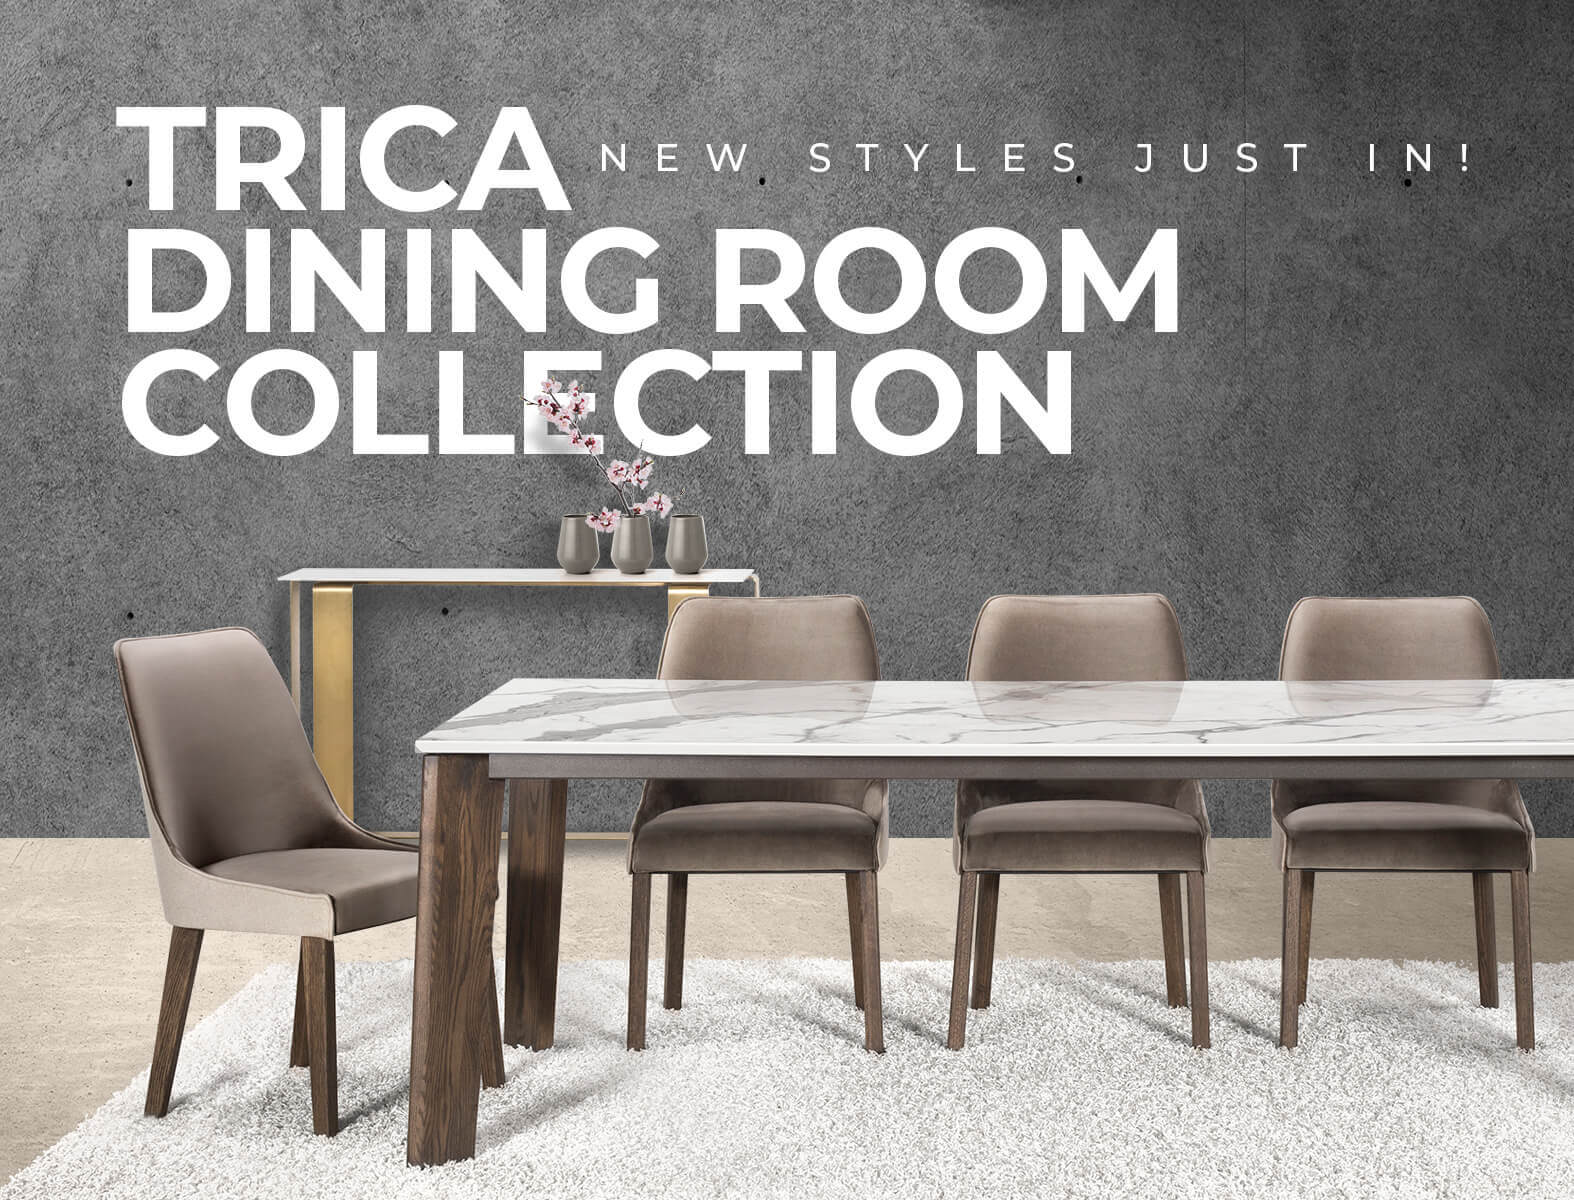 Trica dining collection 